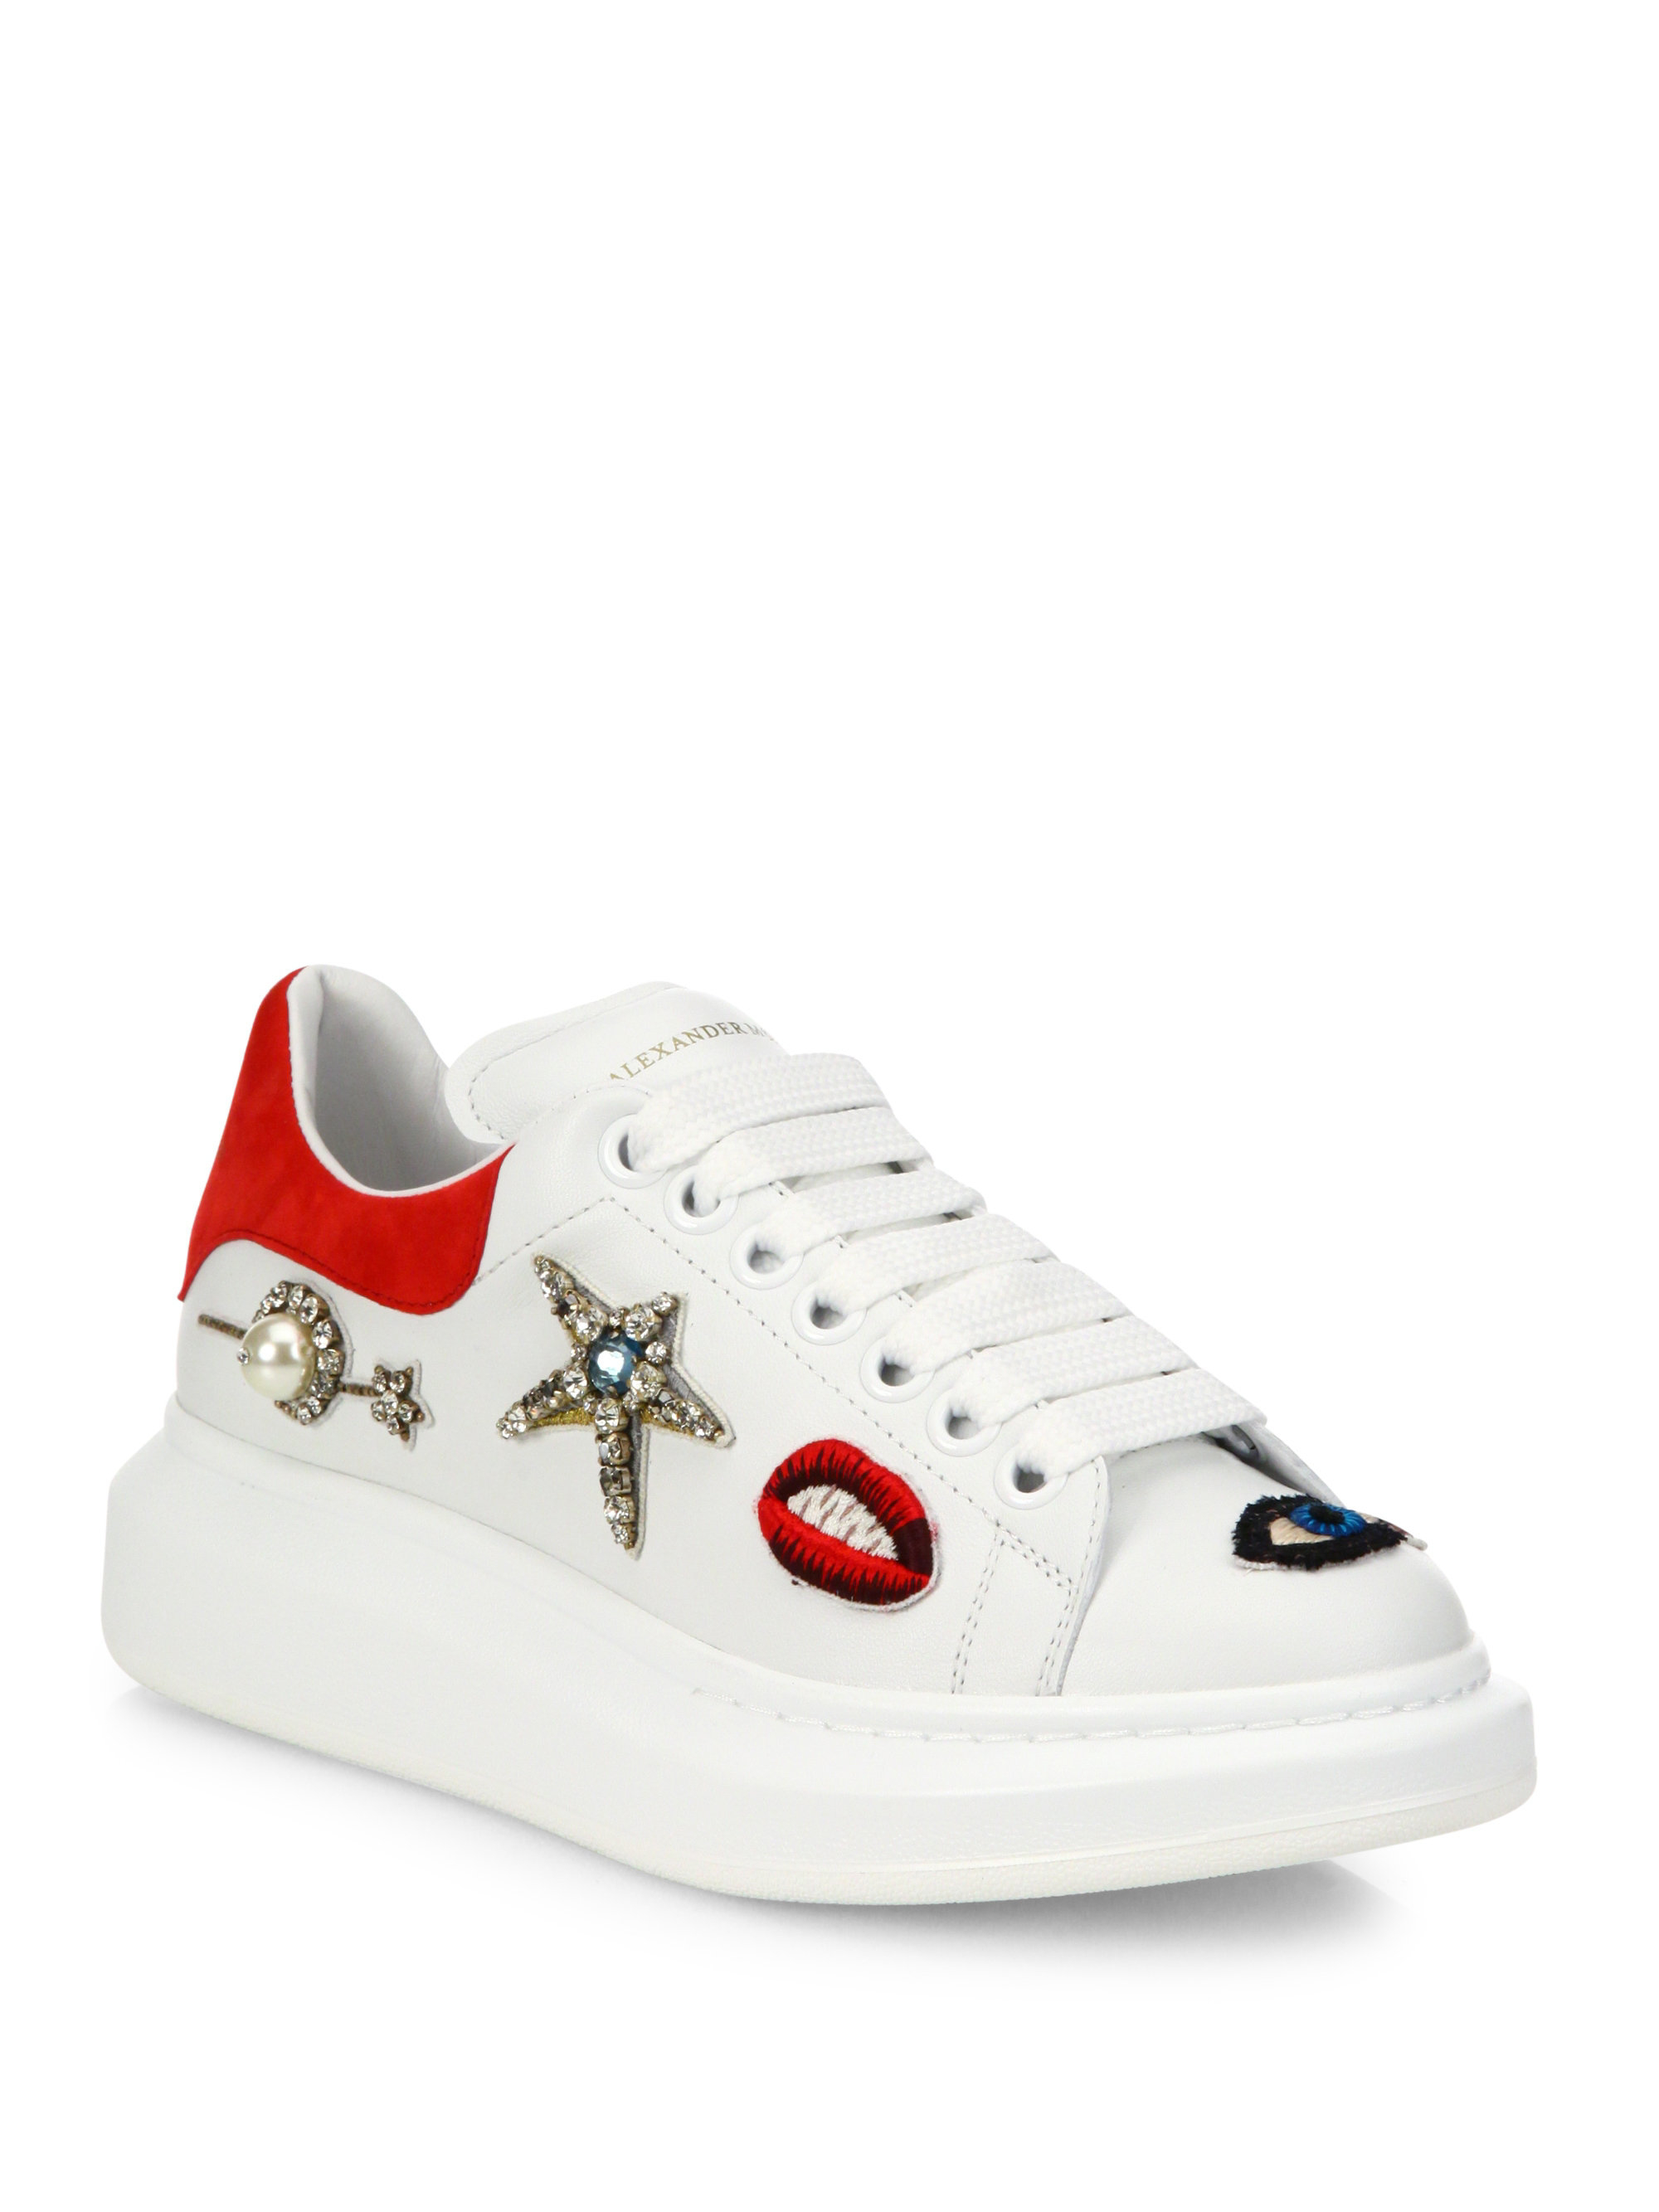 Lyst - Alexander Mcqueen Charm-embroidered Leather Platform Sneakers